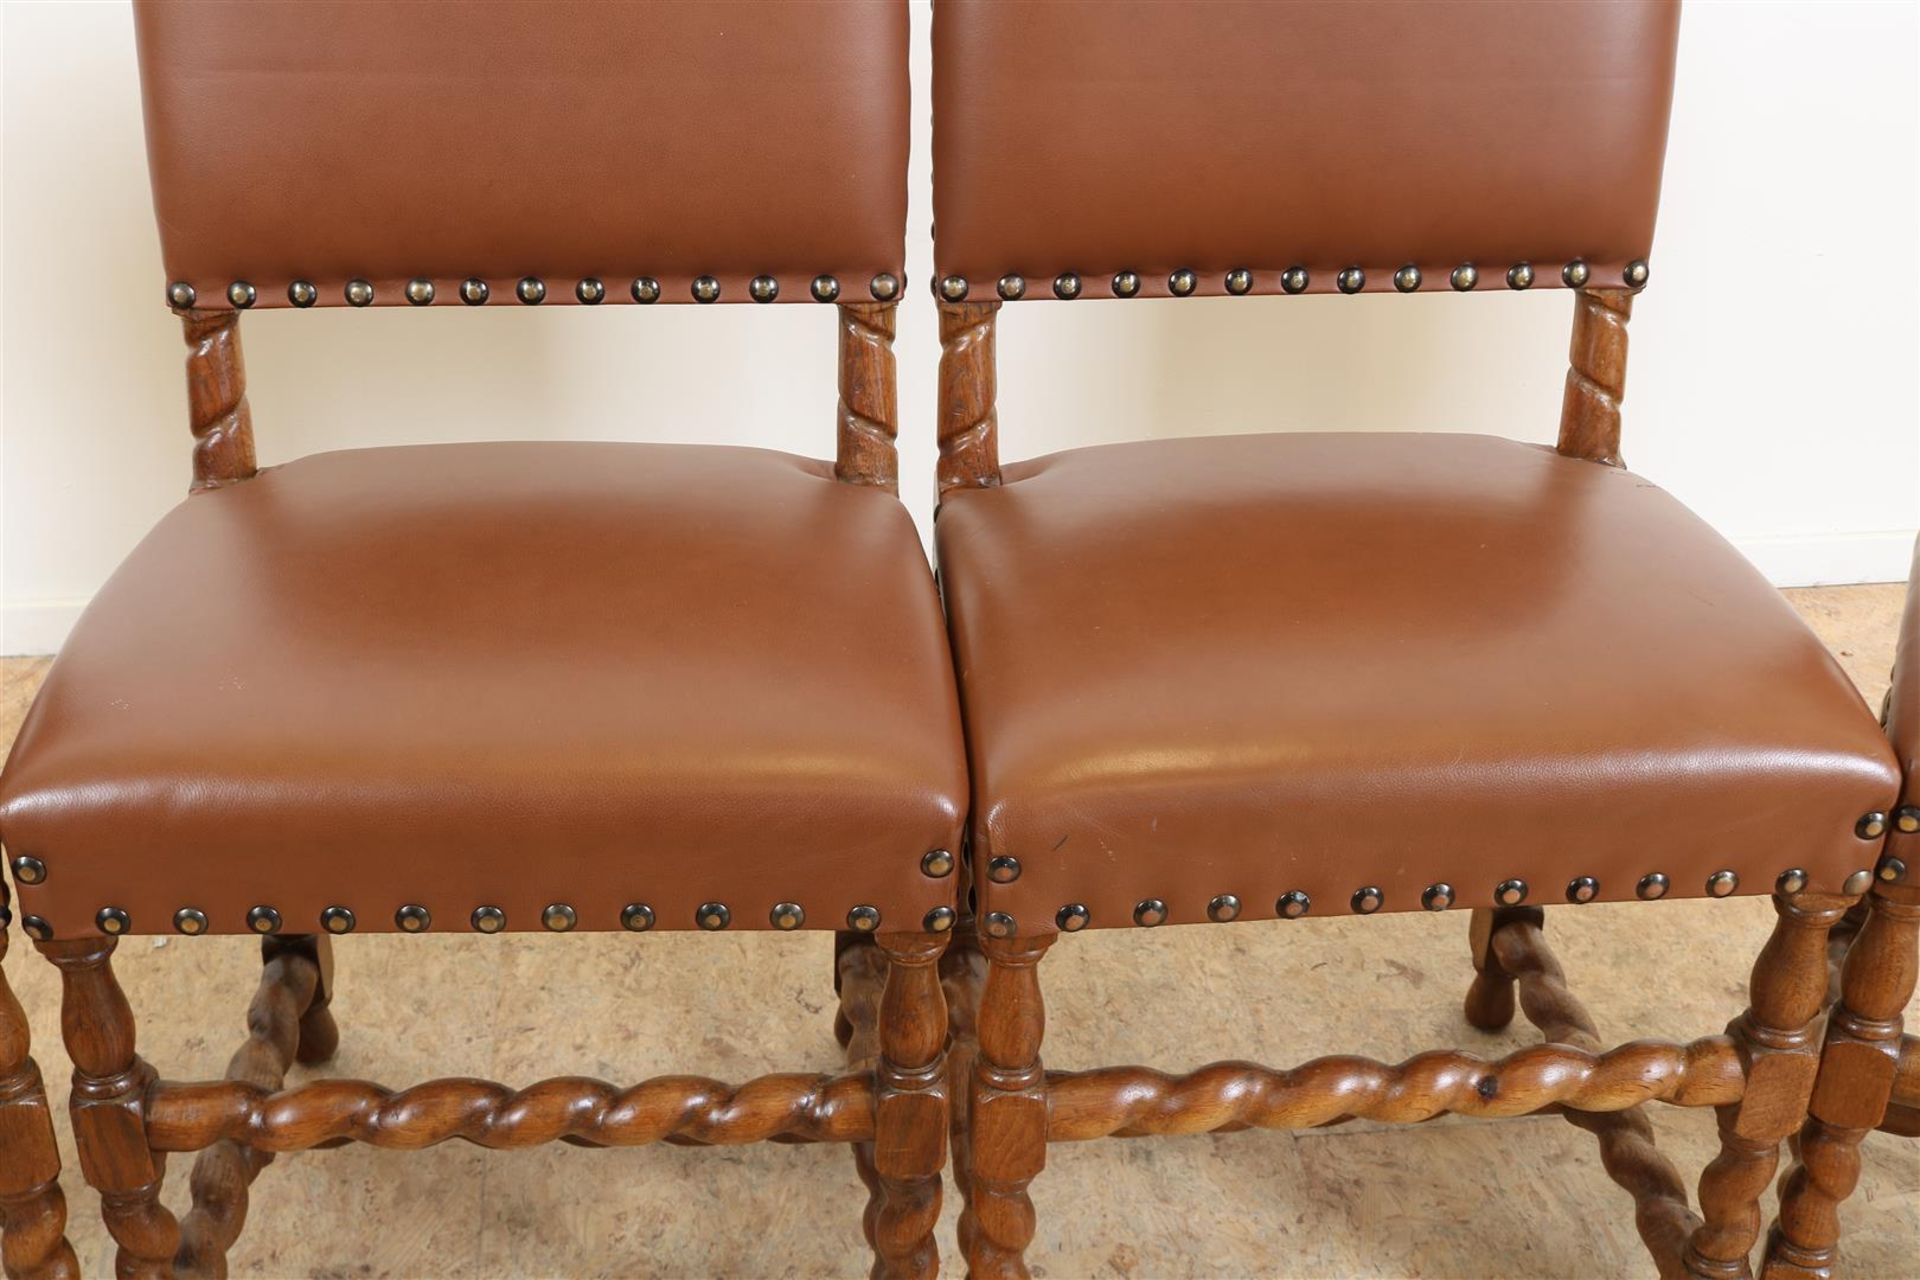 Series of 4 oak Renaissance-style chairs upholstered in brown leather. - Image 3 of 6